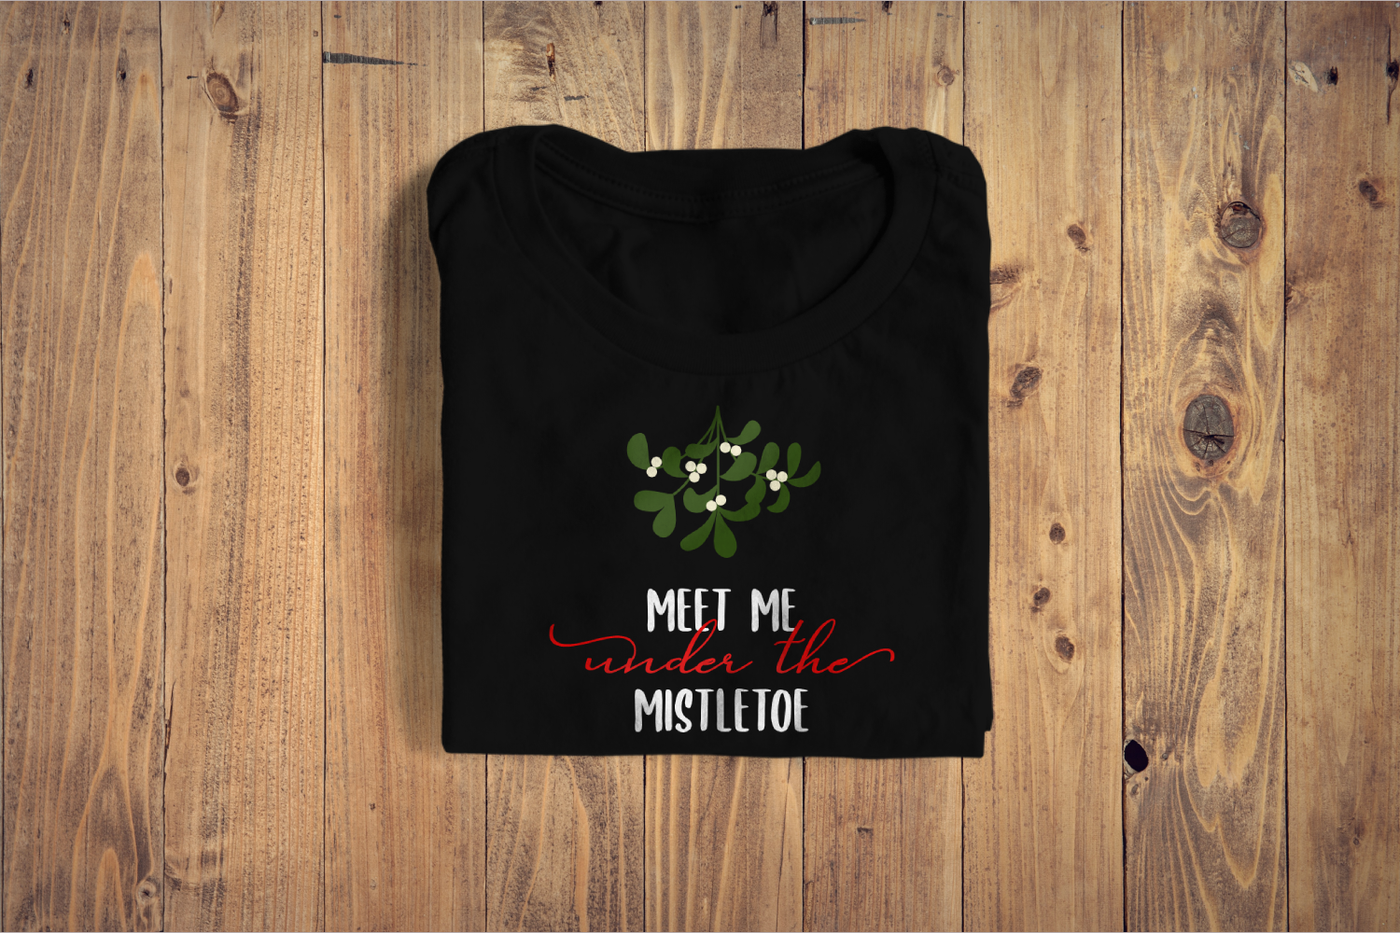 A shirt with a design that says "meet me under the mistletoe" with a sprig of mistletoe.